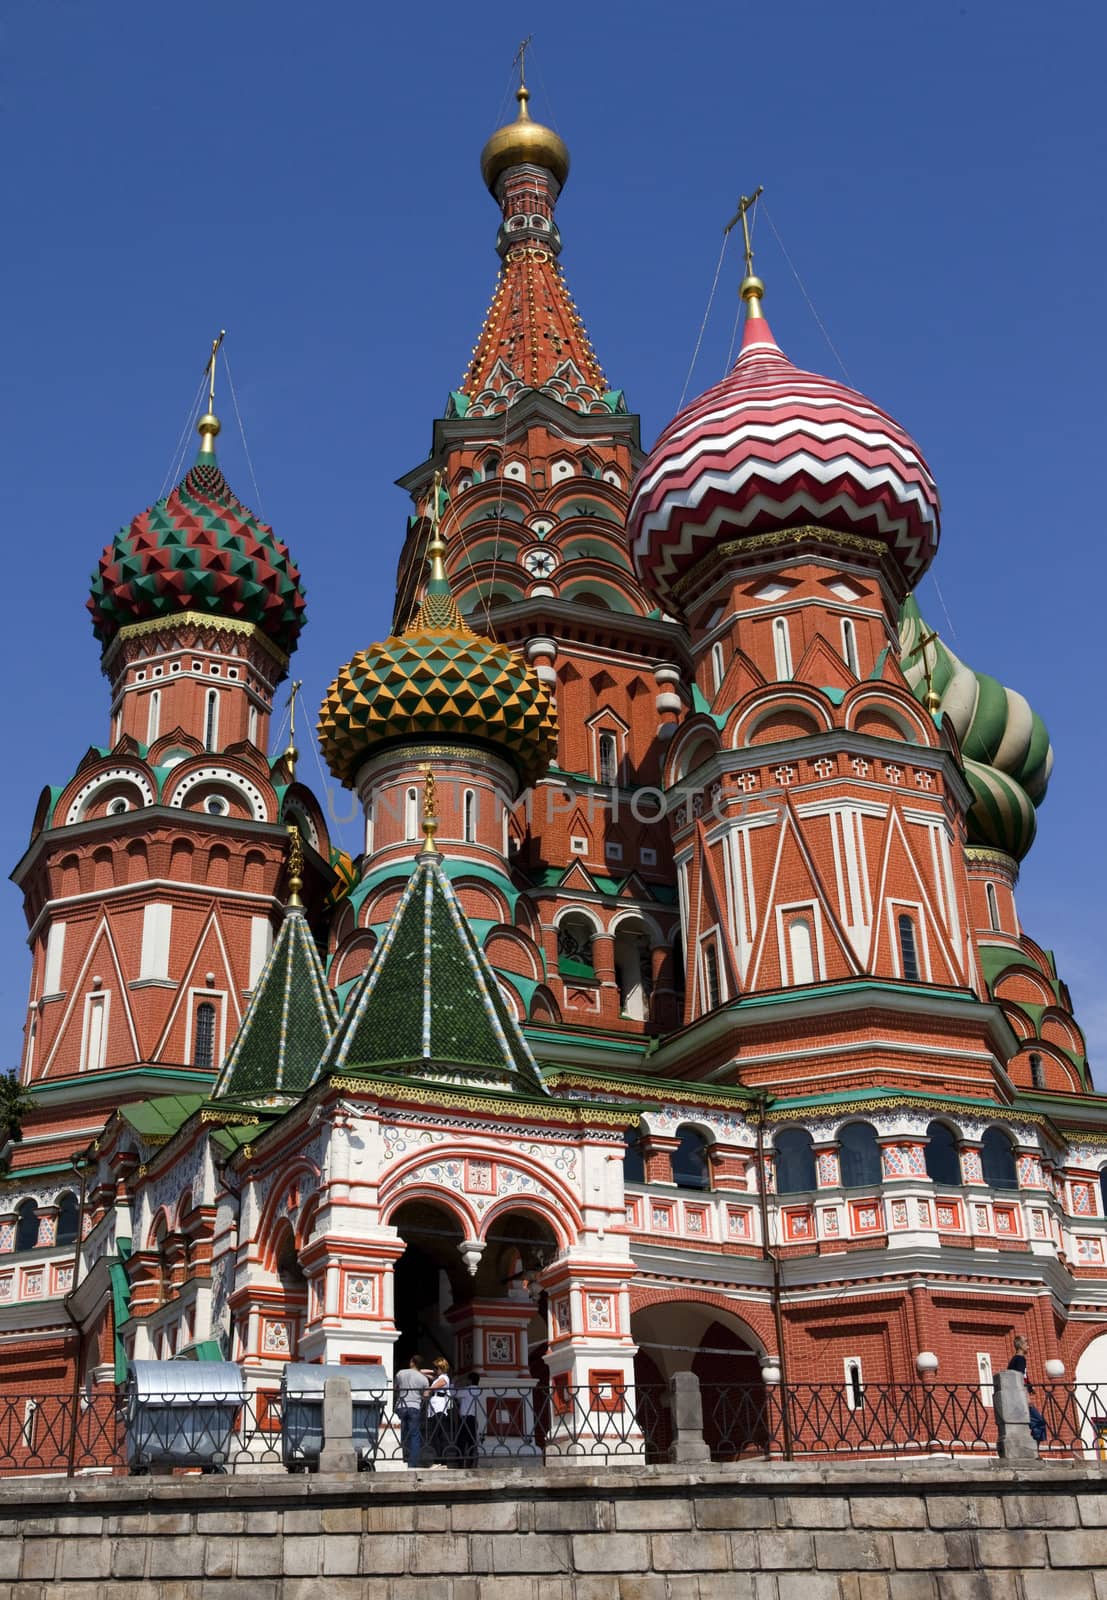 St Basil's Cathderal on Red Square, Moscow.